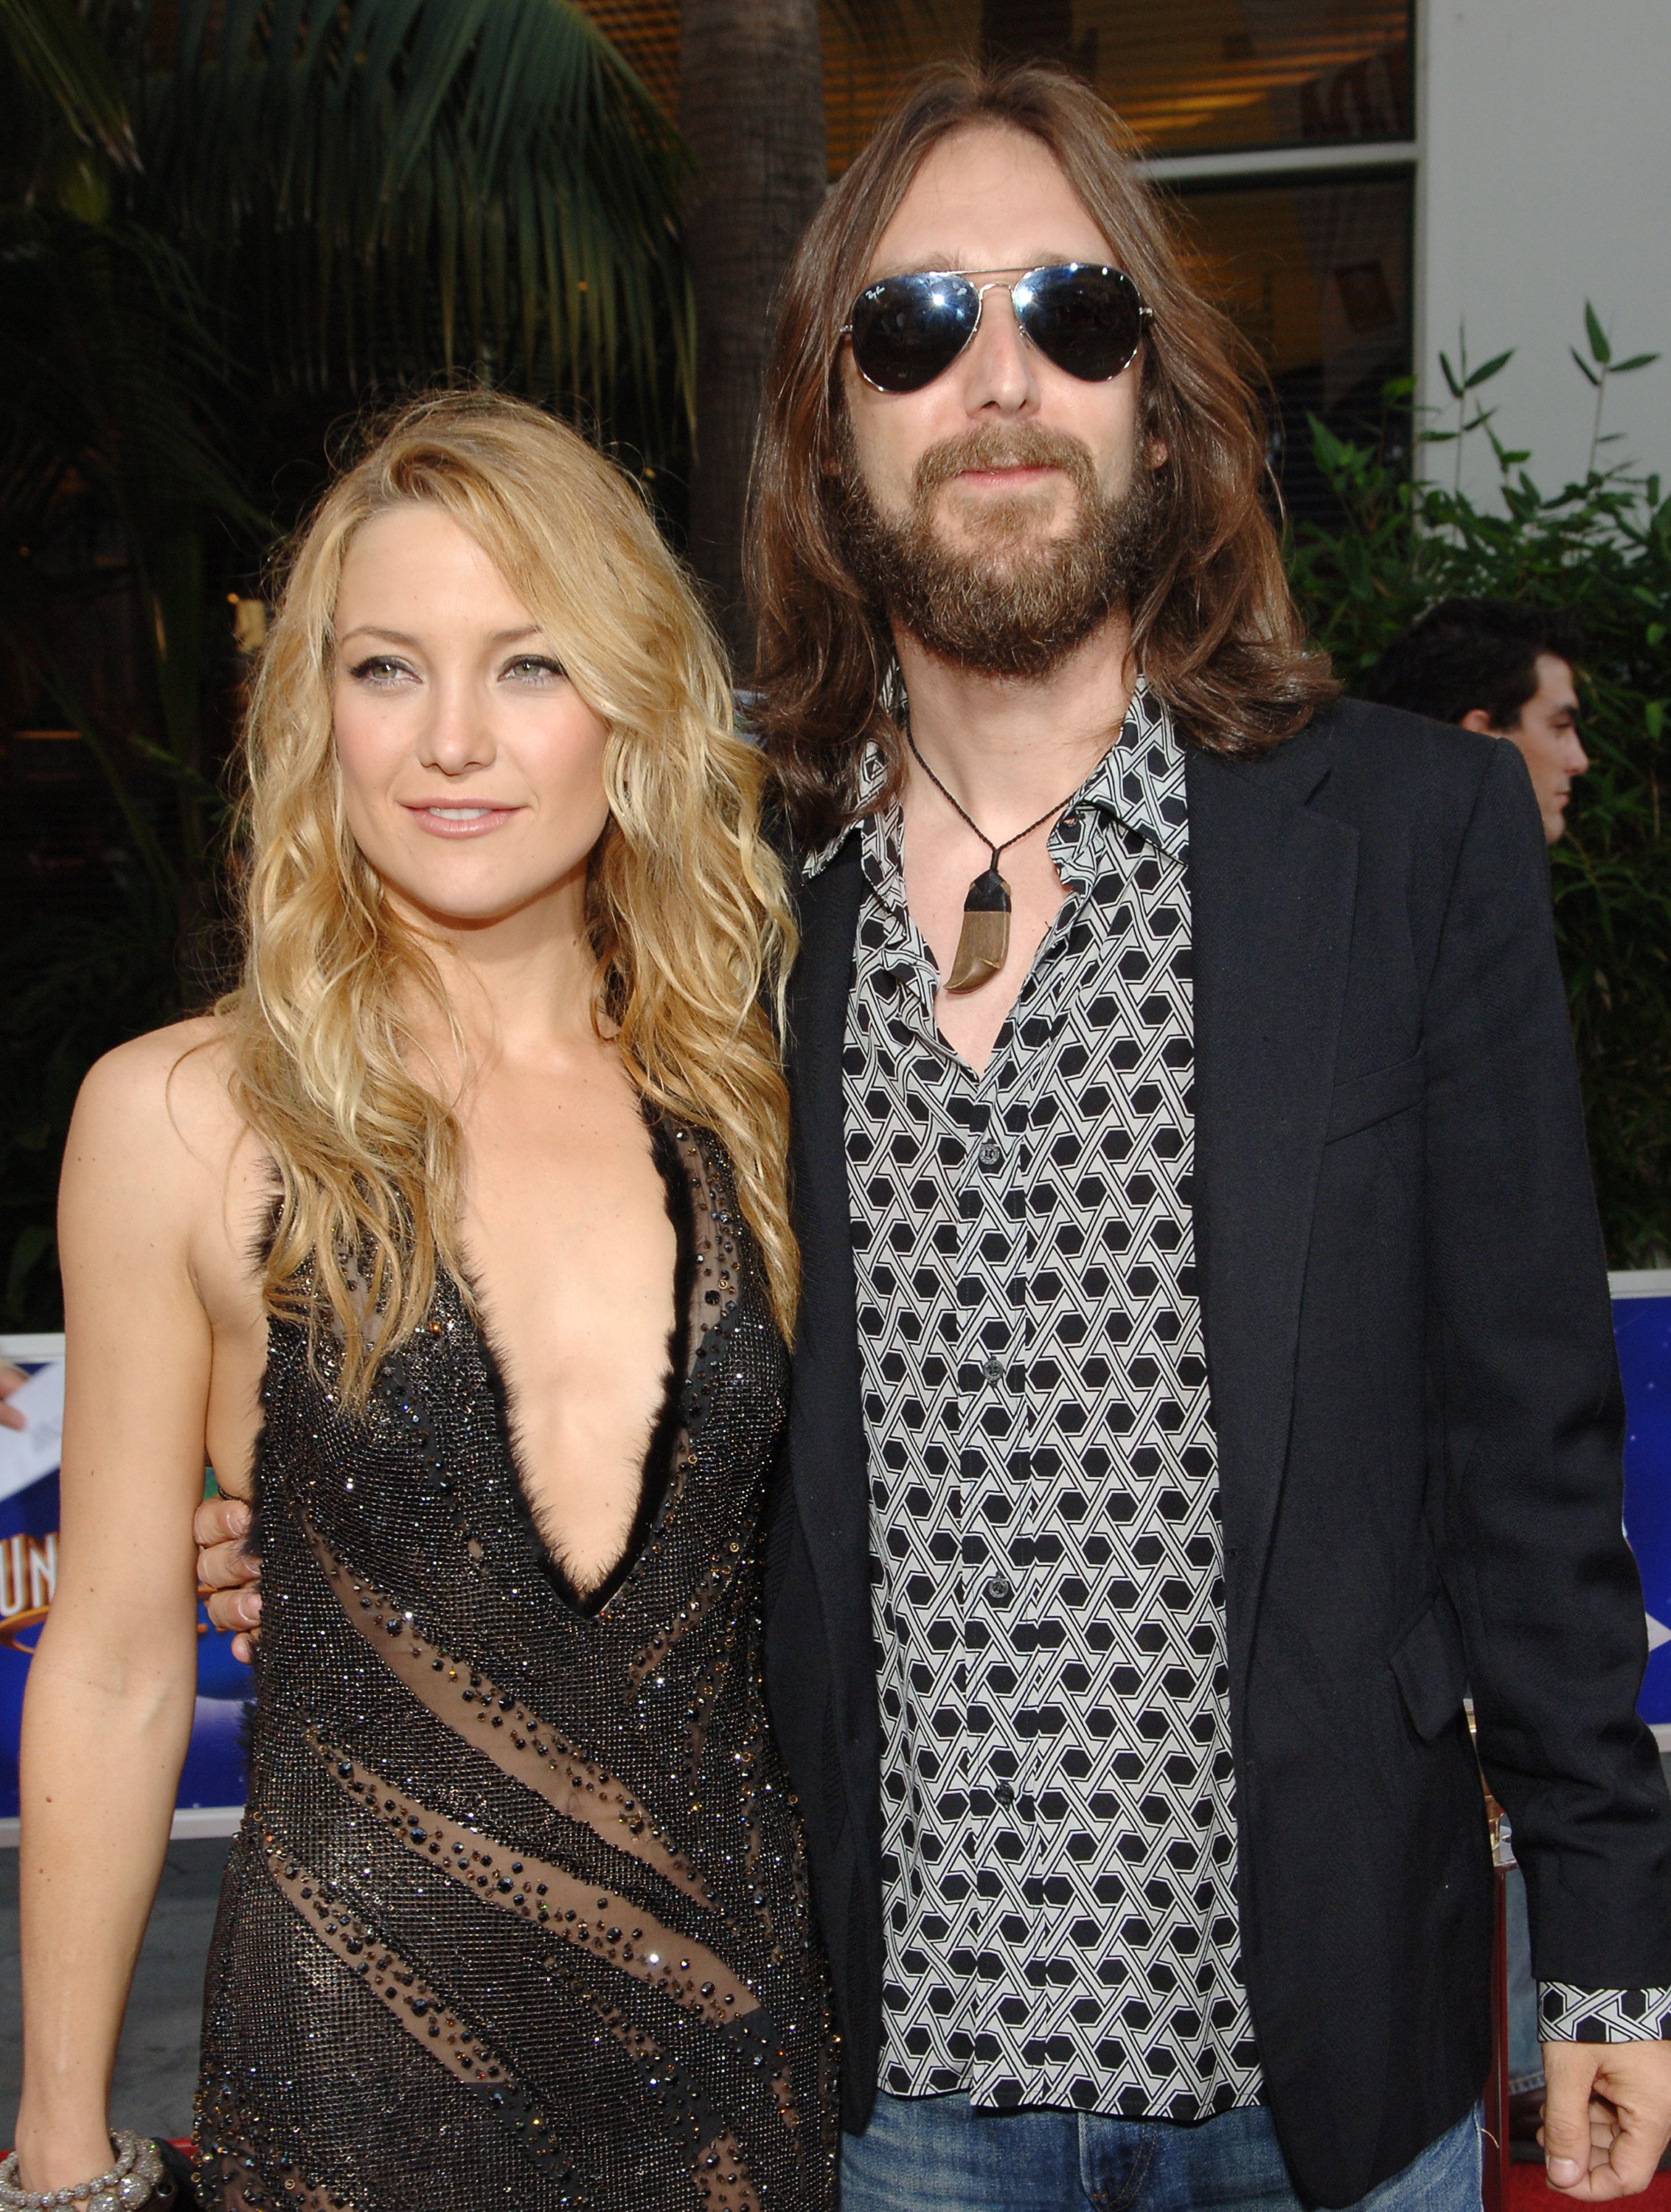 Kate Hudson and Chris Robinson during "The Skeleton Key" Los Angeles Premiere - Arrivals at Universal City Walk on August 02, 2005 in Universal City, California | Source: Getty Images